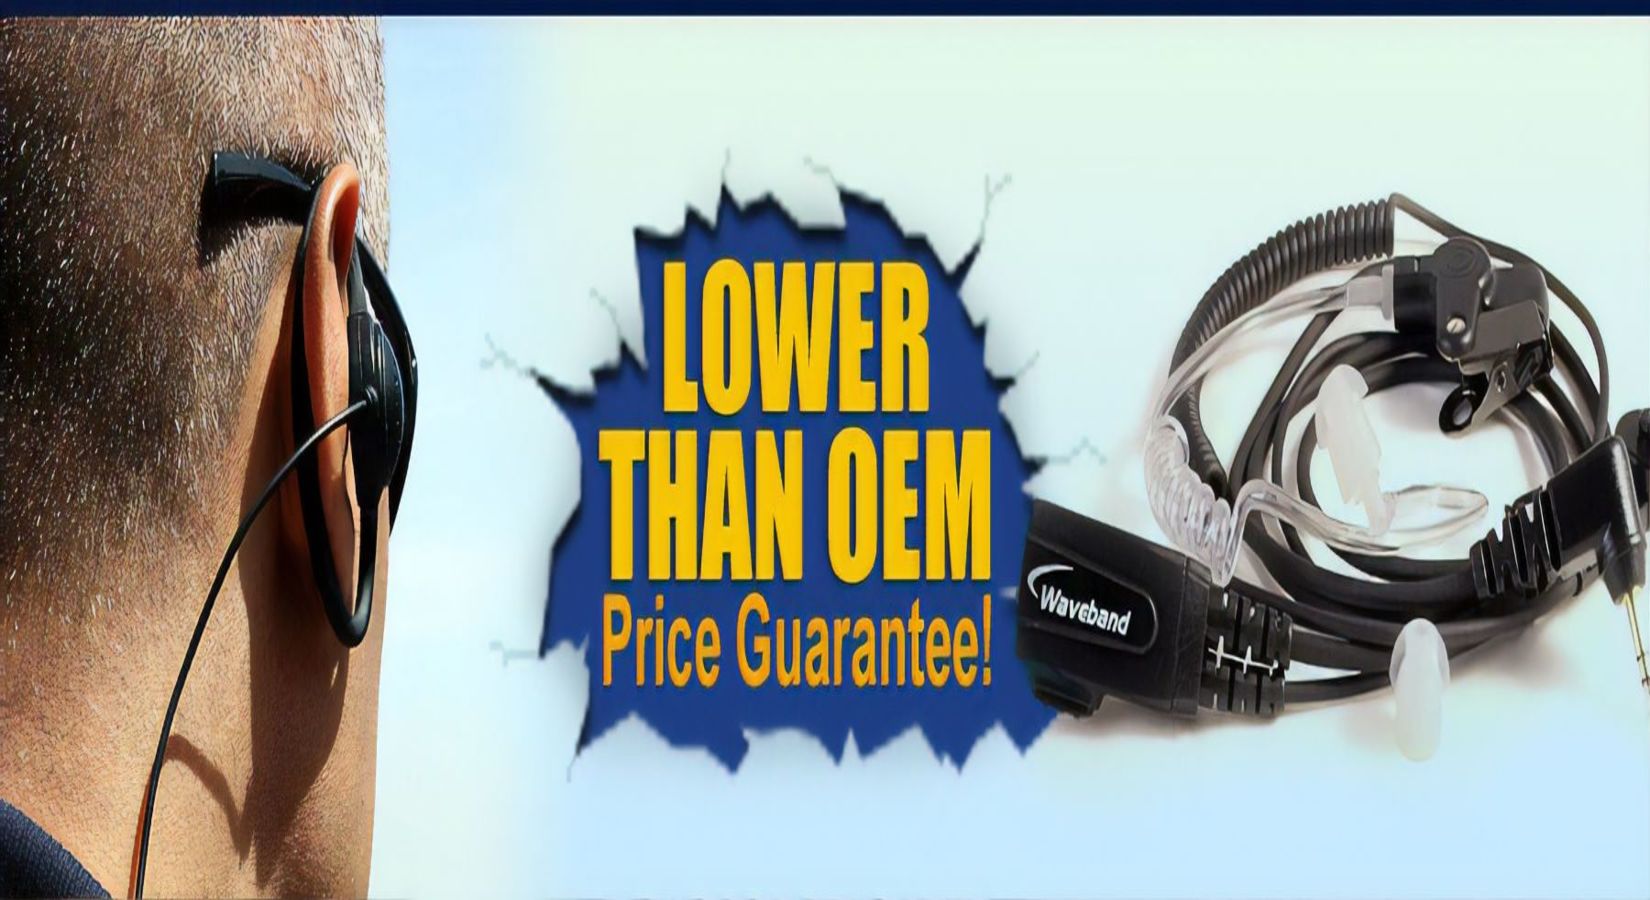 Waveband Communications Lower Prices Than OEM